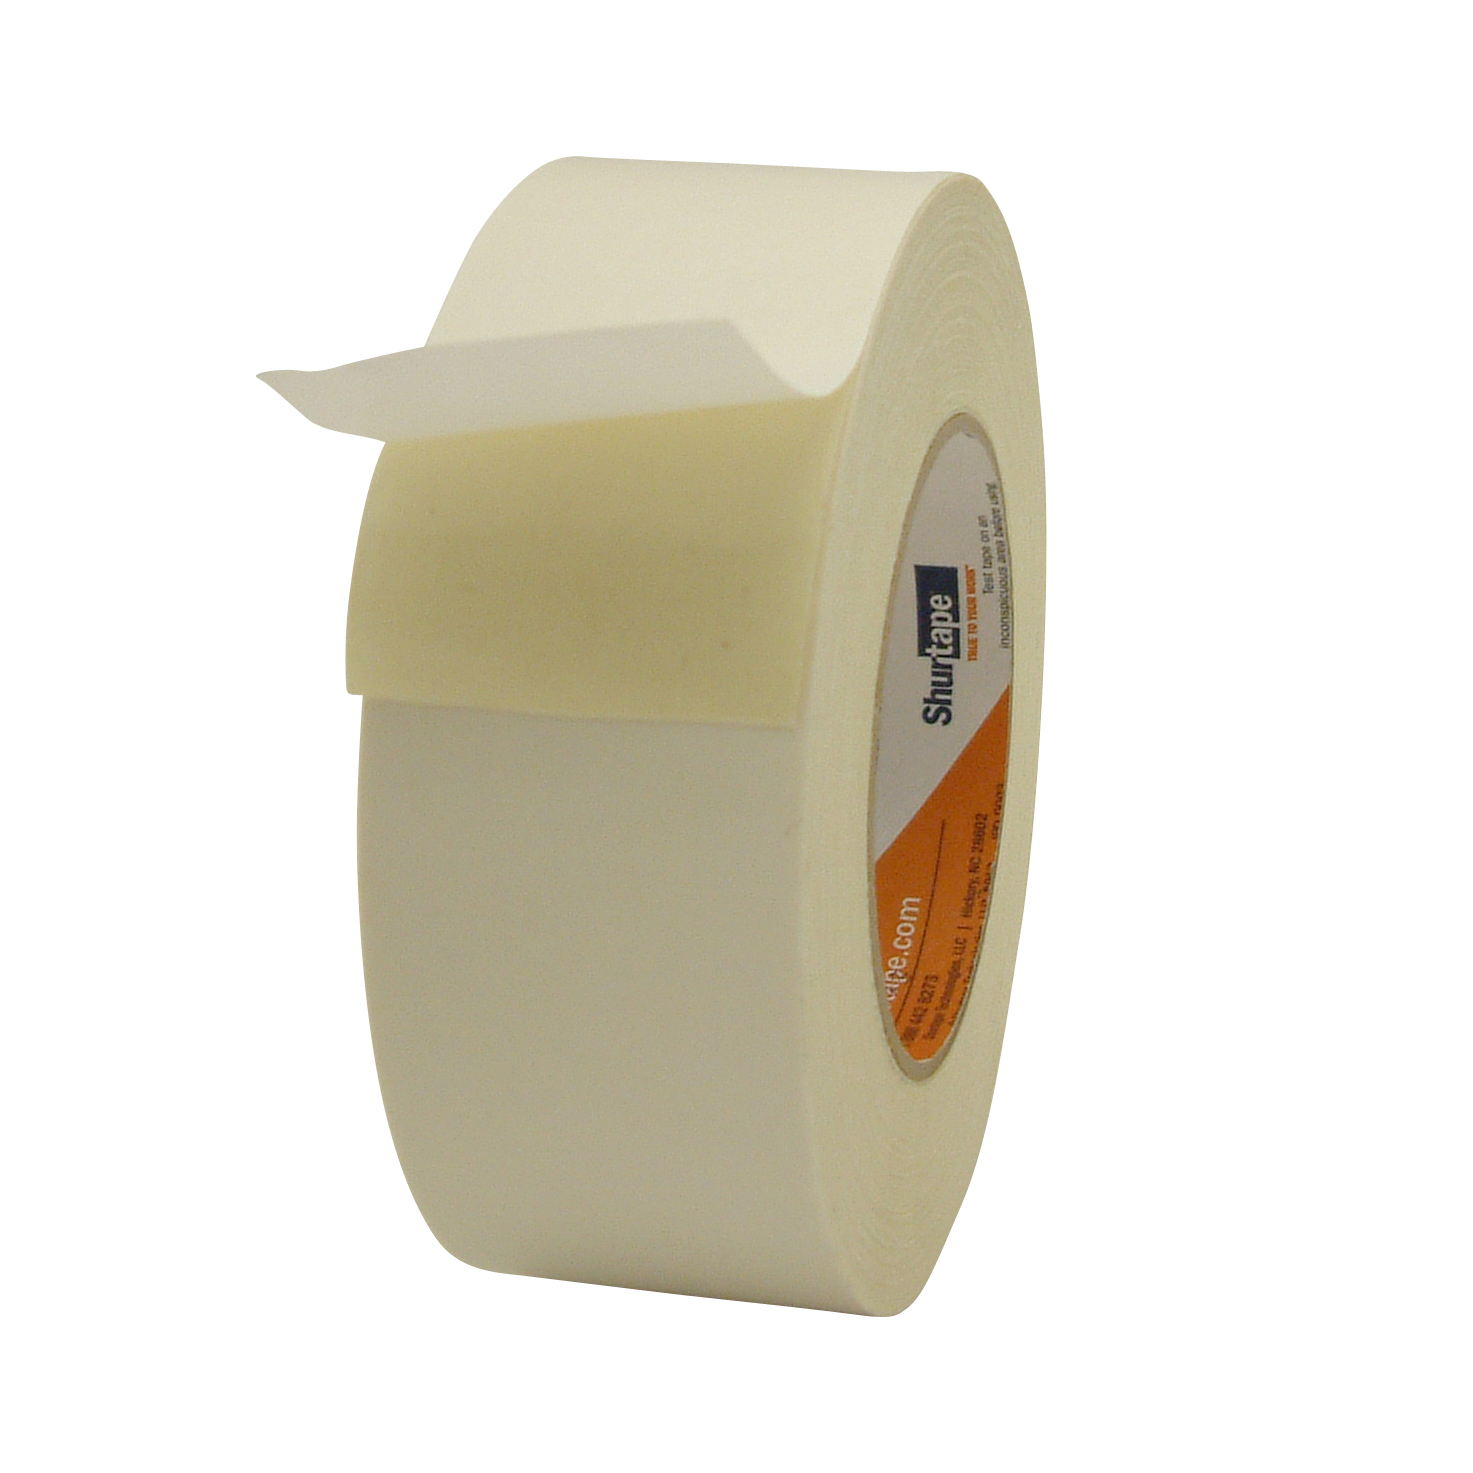 Shurtape Industrial-Grade Double-Sided Cloth Tape (DF-642)